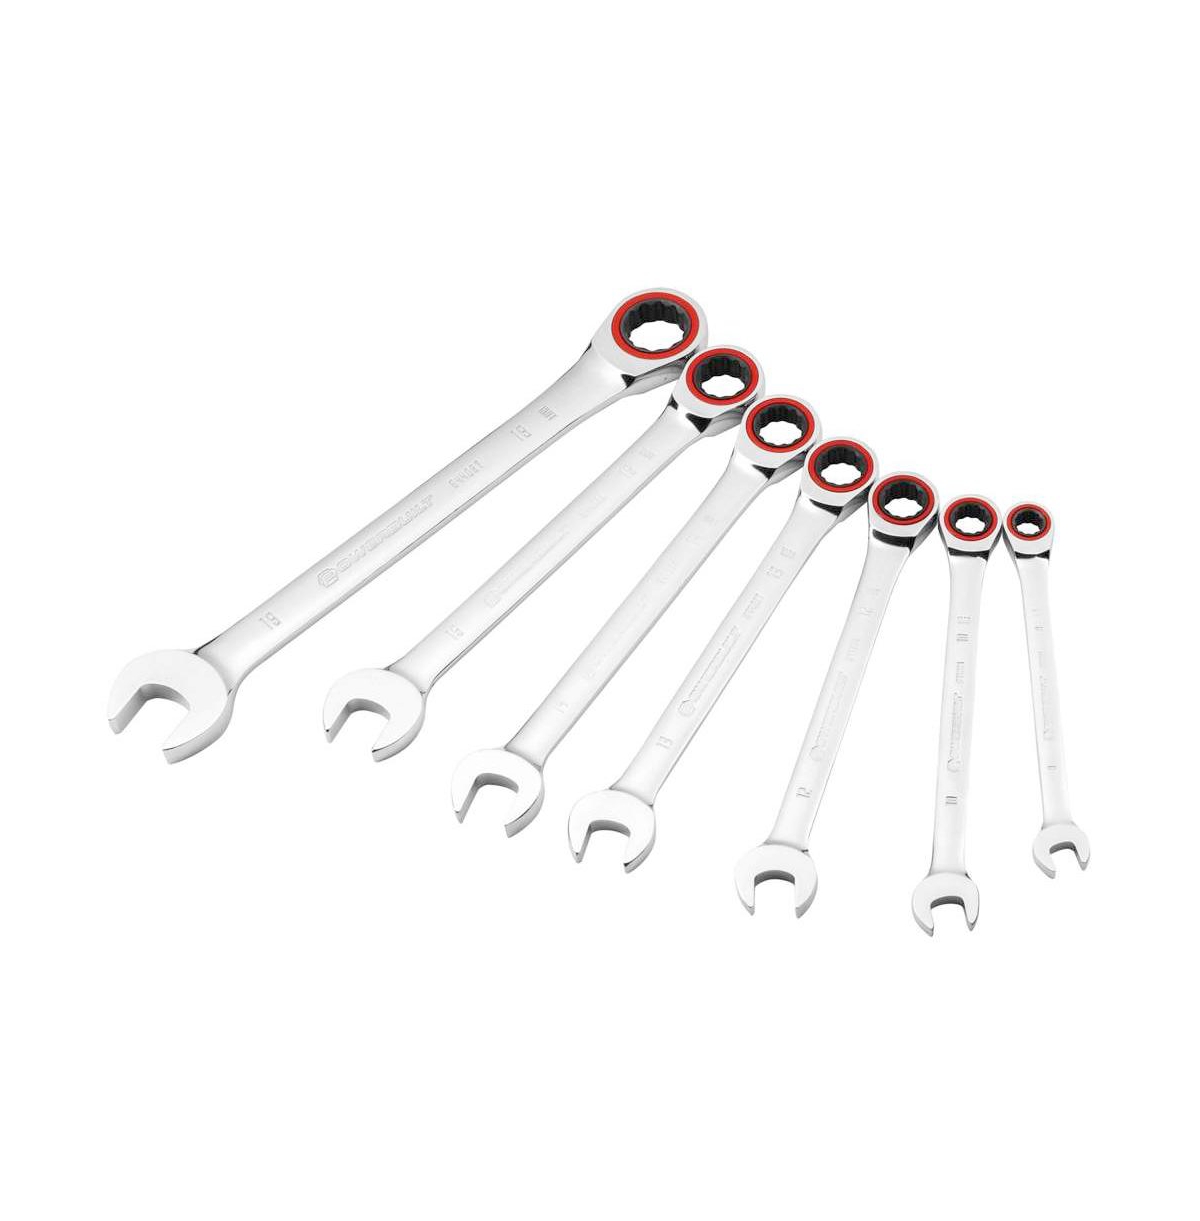 7 Piece Metric 100 Tooth Ratcheting Wrench Set - Silver